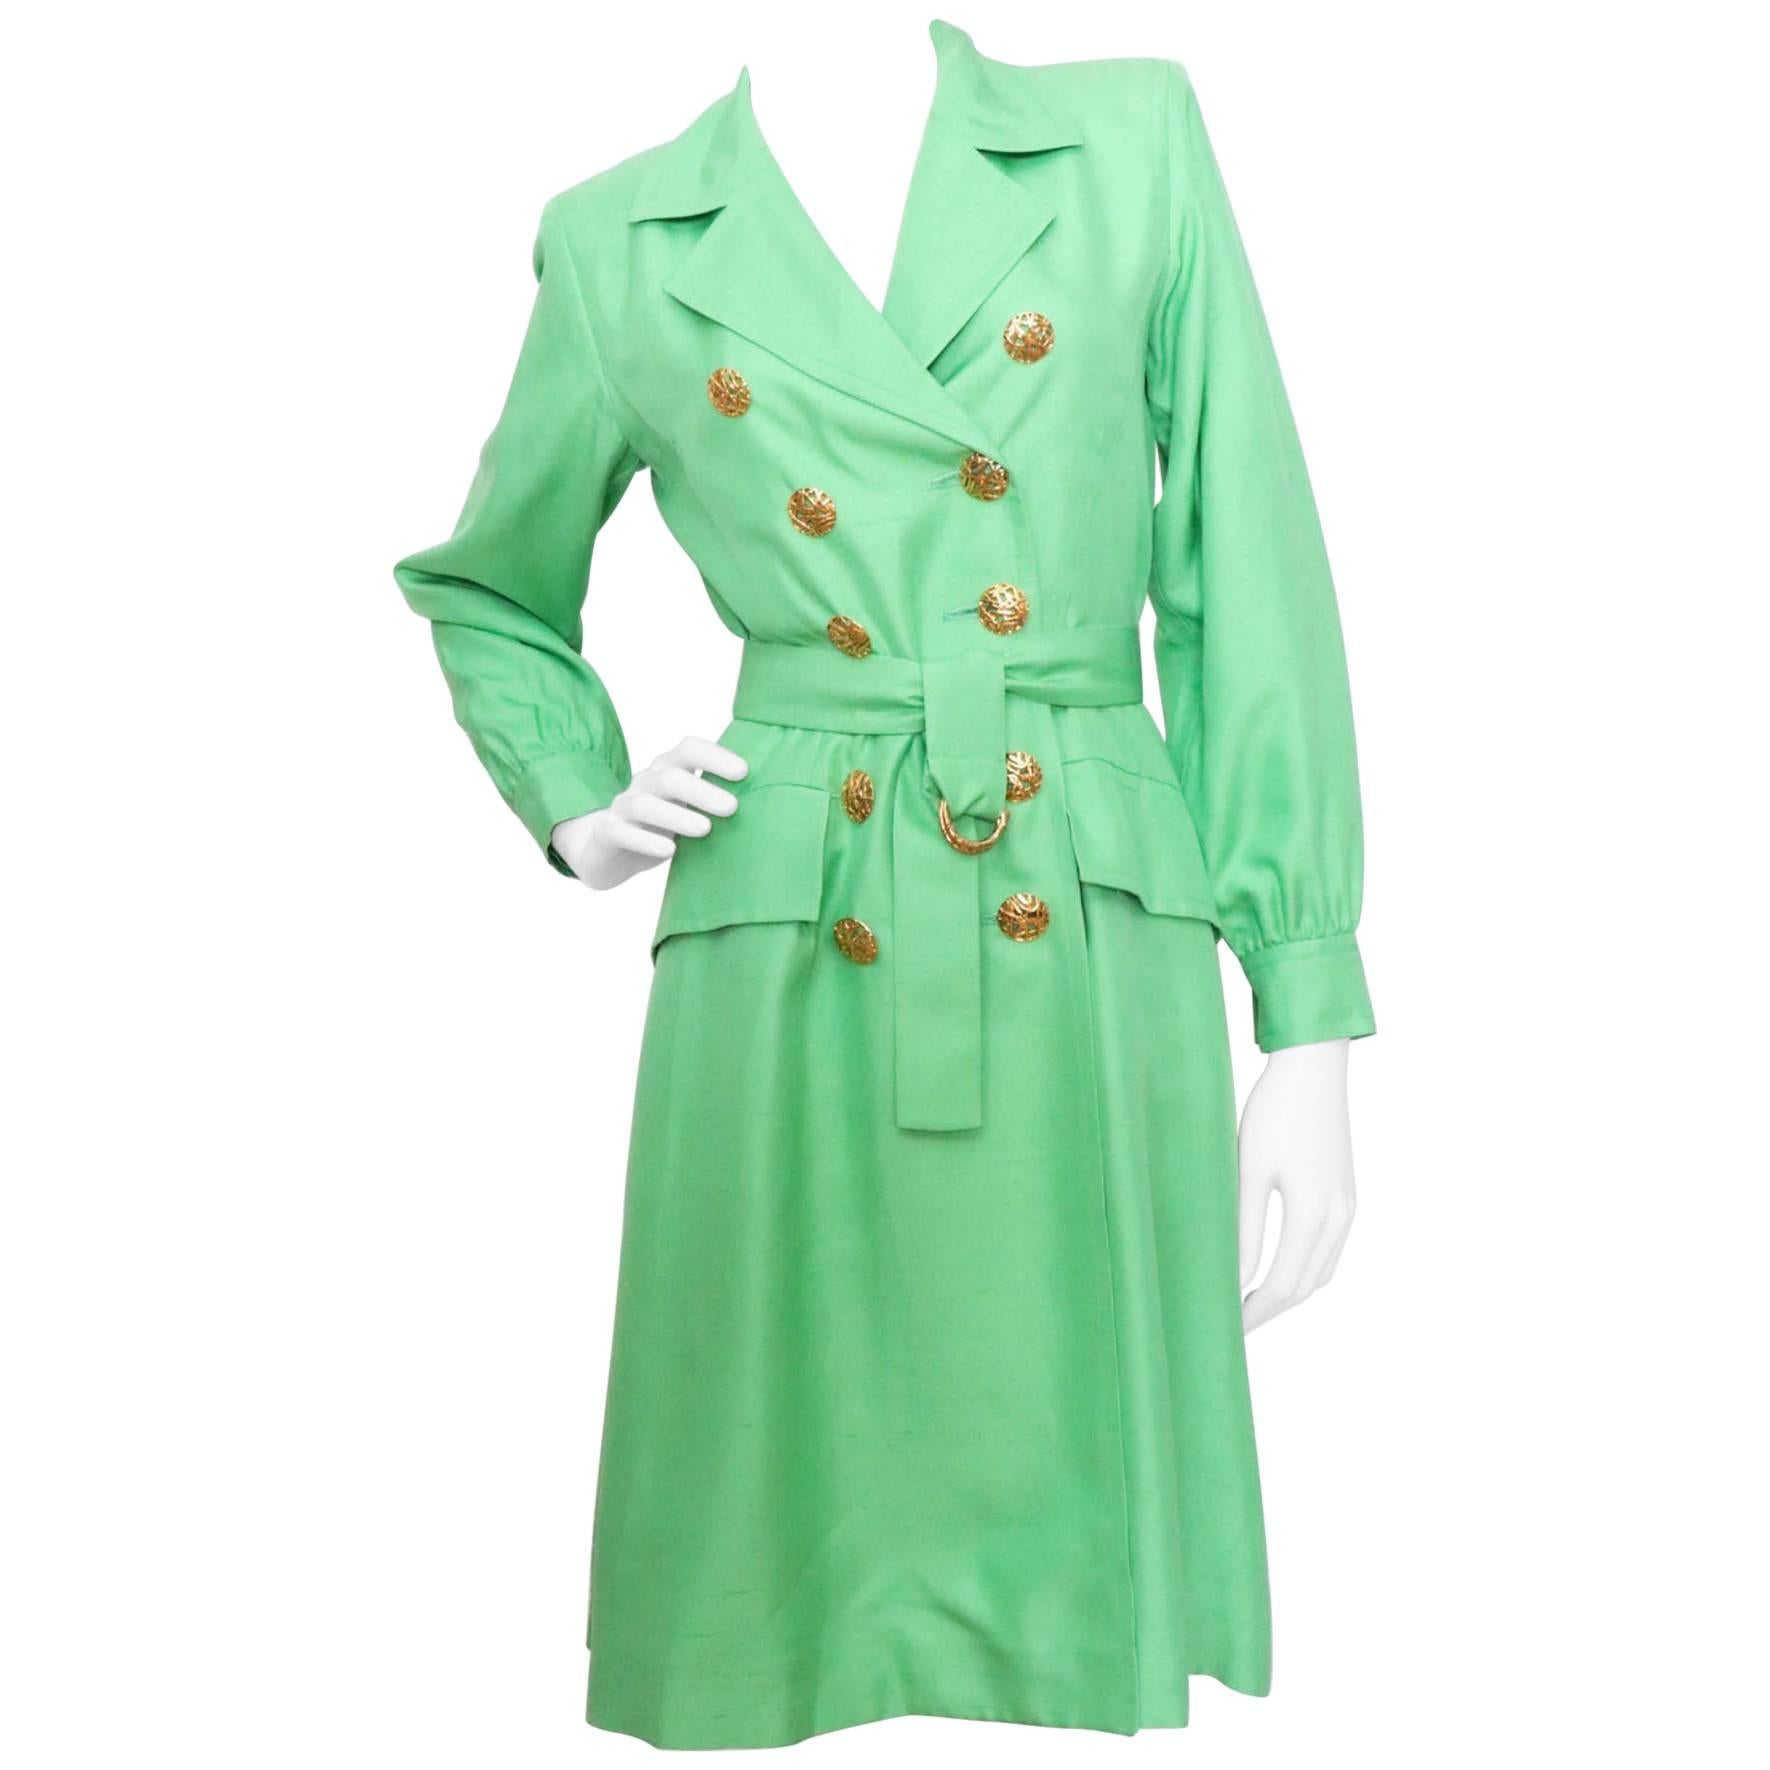 A 1960s Vintage Yves Saint Laurent Rive Gauche Bright Green Silk Trench Coat XS